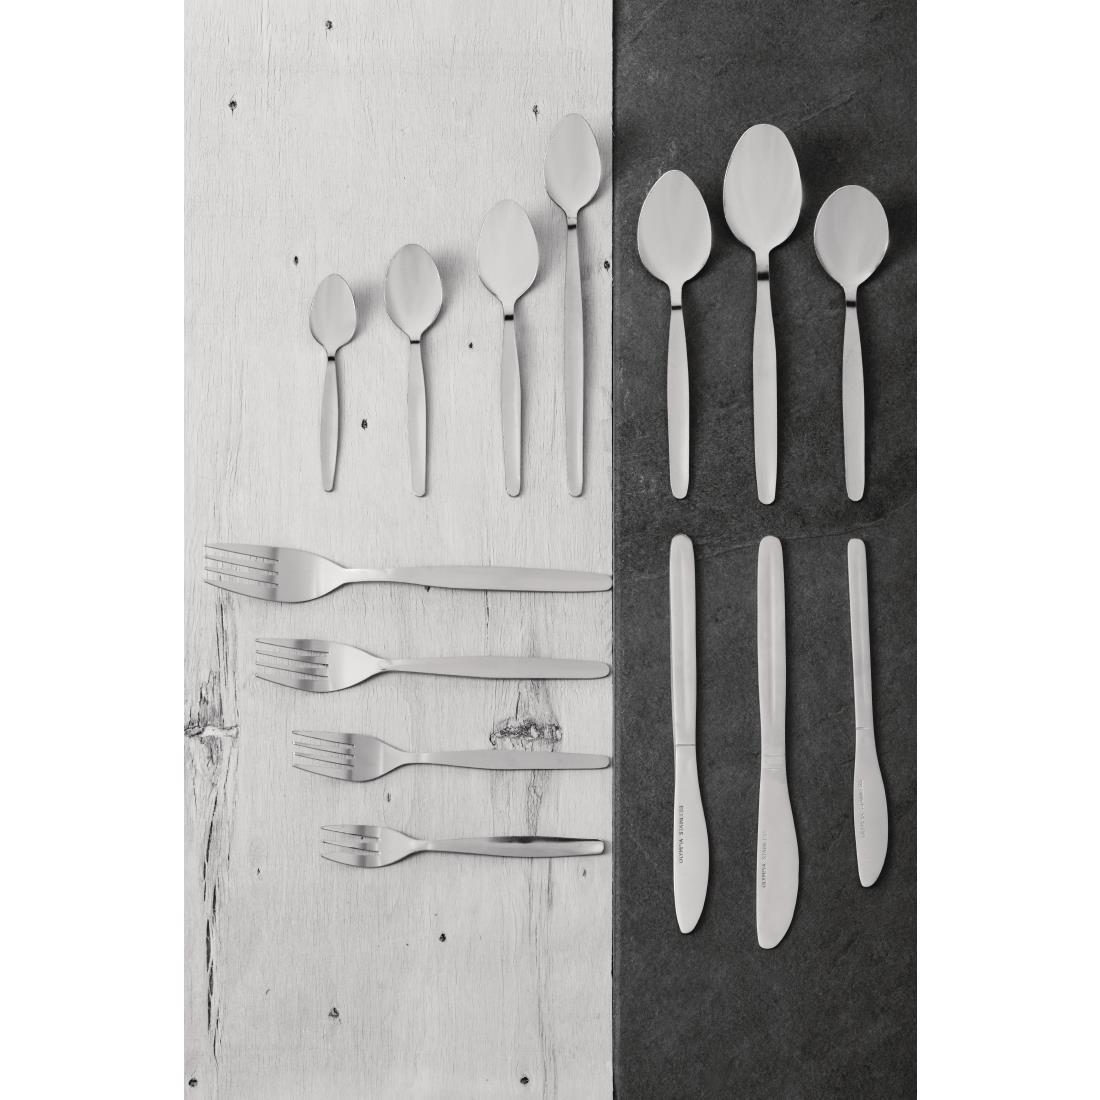 Olympia Kelso Childrens Fork (Pack of 12) - CB064  - 2